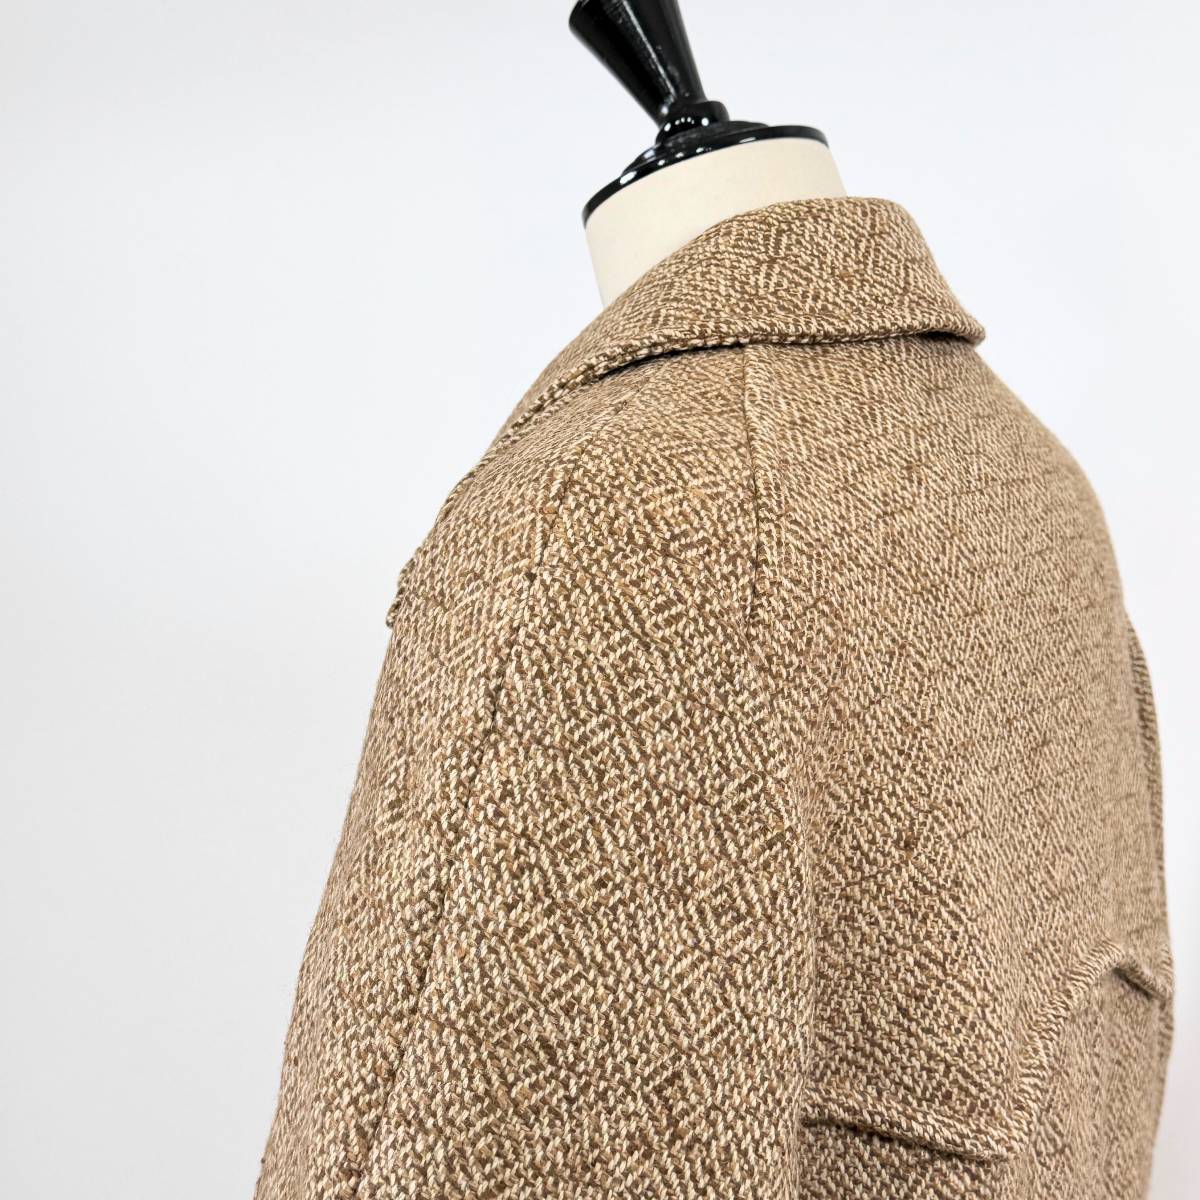  rare { Mint Condition / the first see / 40REG }60s 70s finest quality goods [ AQUASCUTUM Rich Field tweed bell tedo coat Canada made Vintage ]